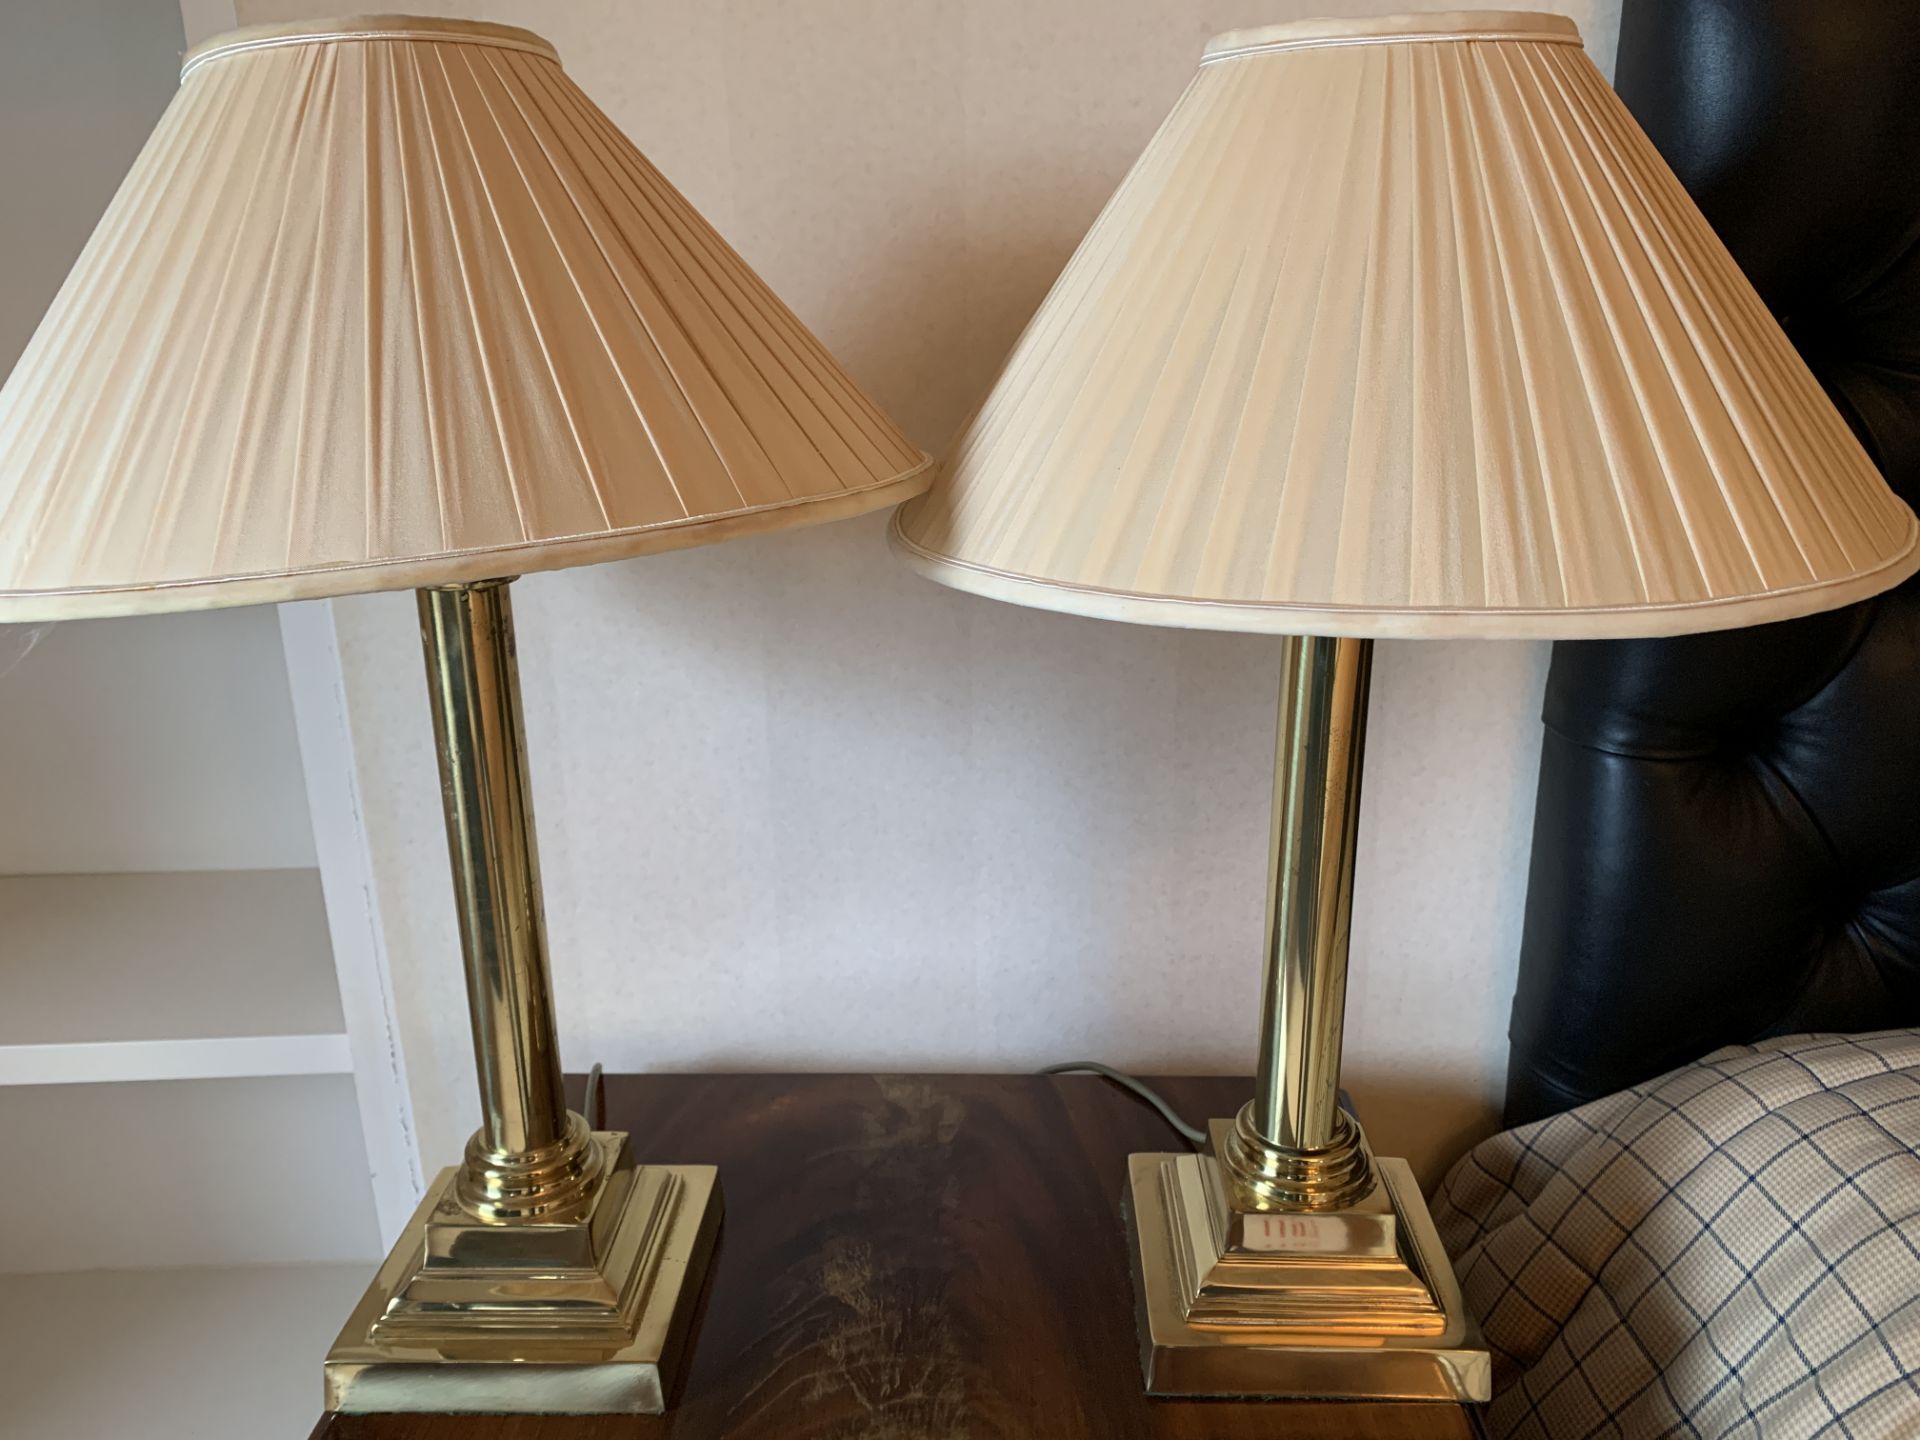 Two brass column table lamps with shades